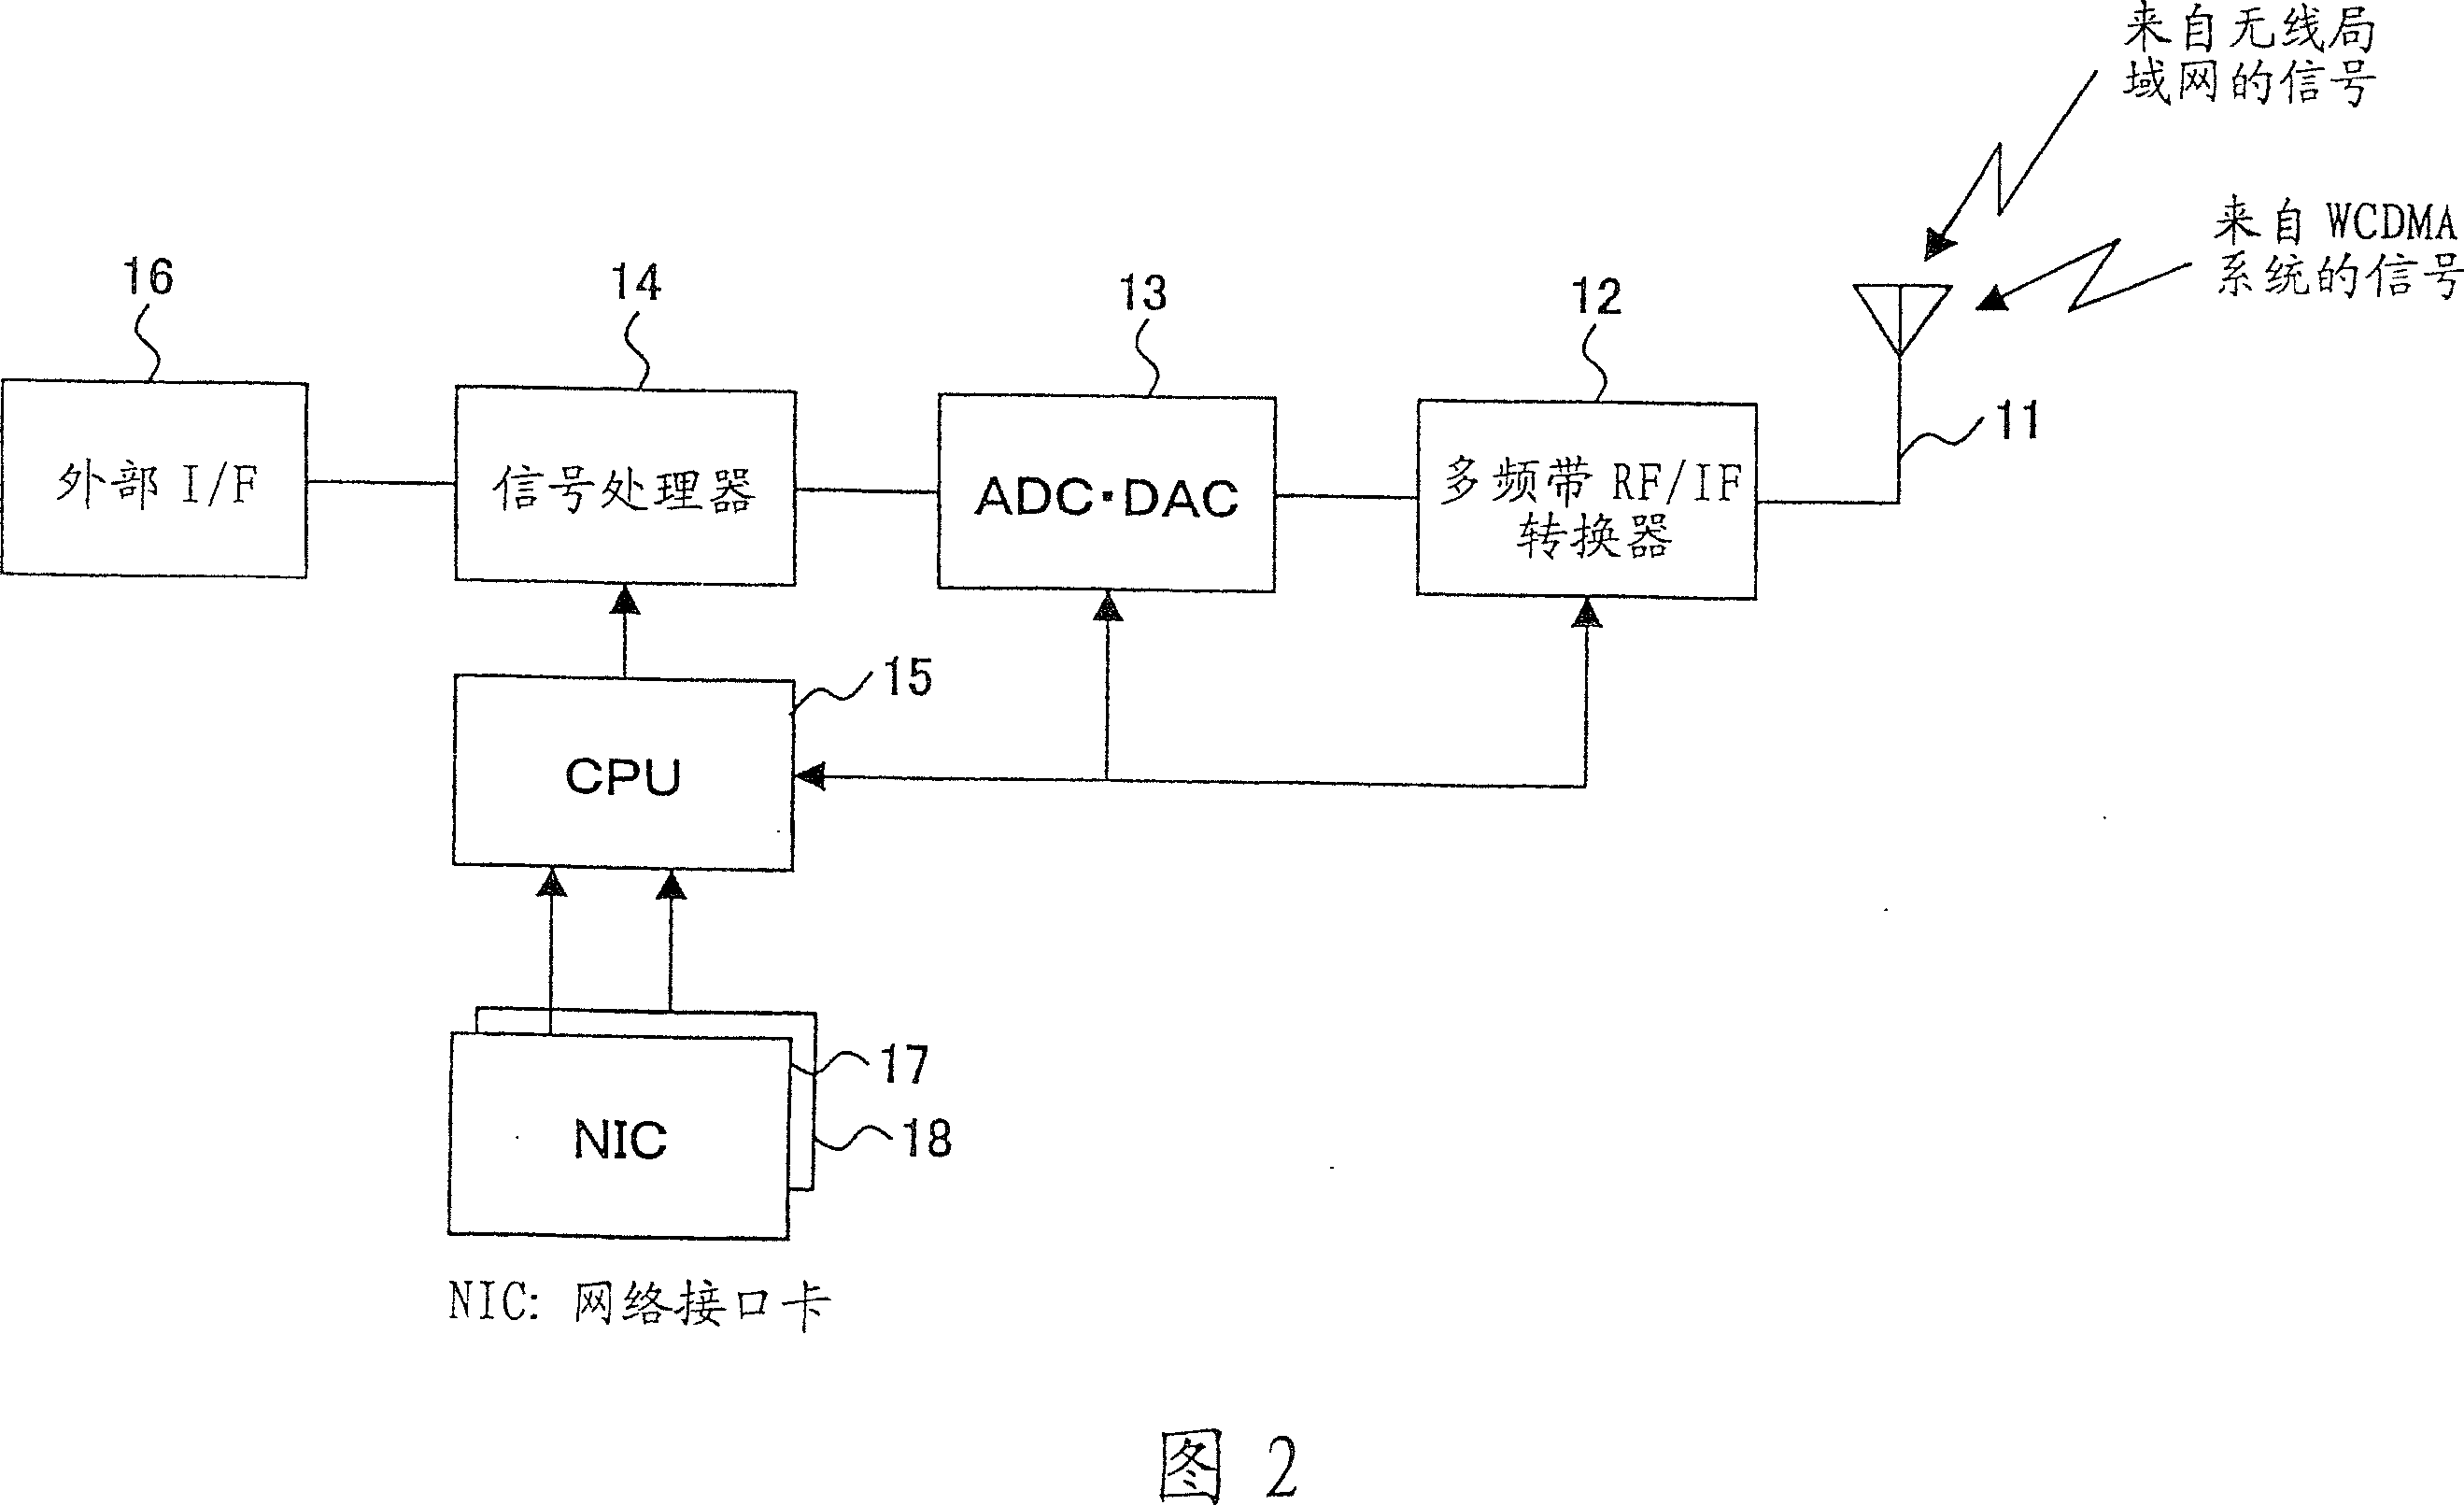 System and method for controlling network, network controlling apparatus, and mobile terminal